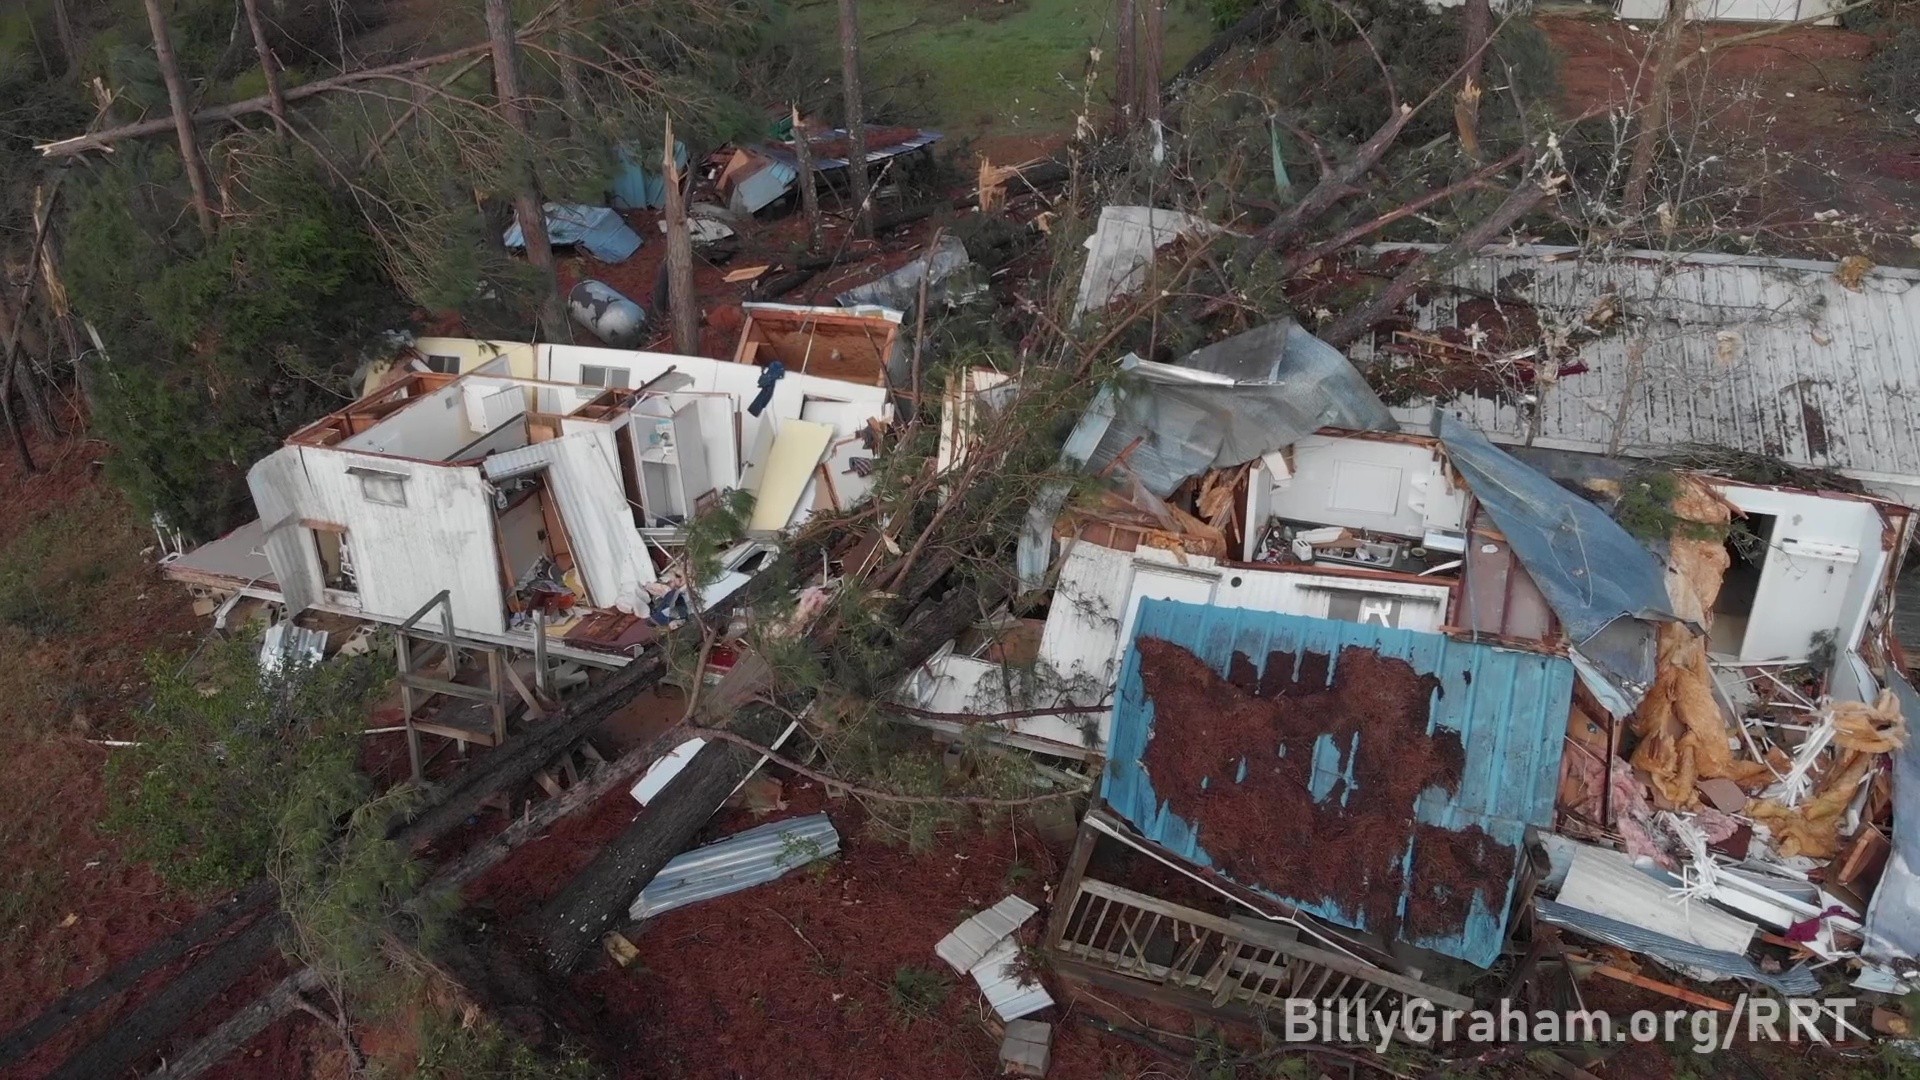 Billy Graham chaplains are caring for Alabama locals in the United States in the aftermath of a series of tornadoes ripped through the area